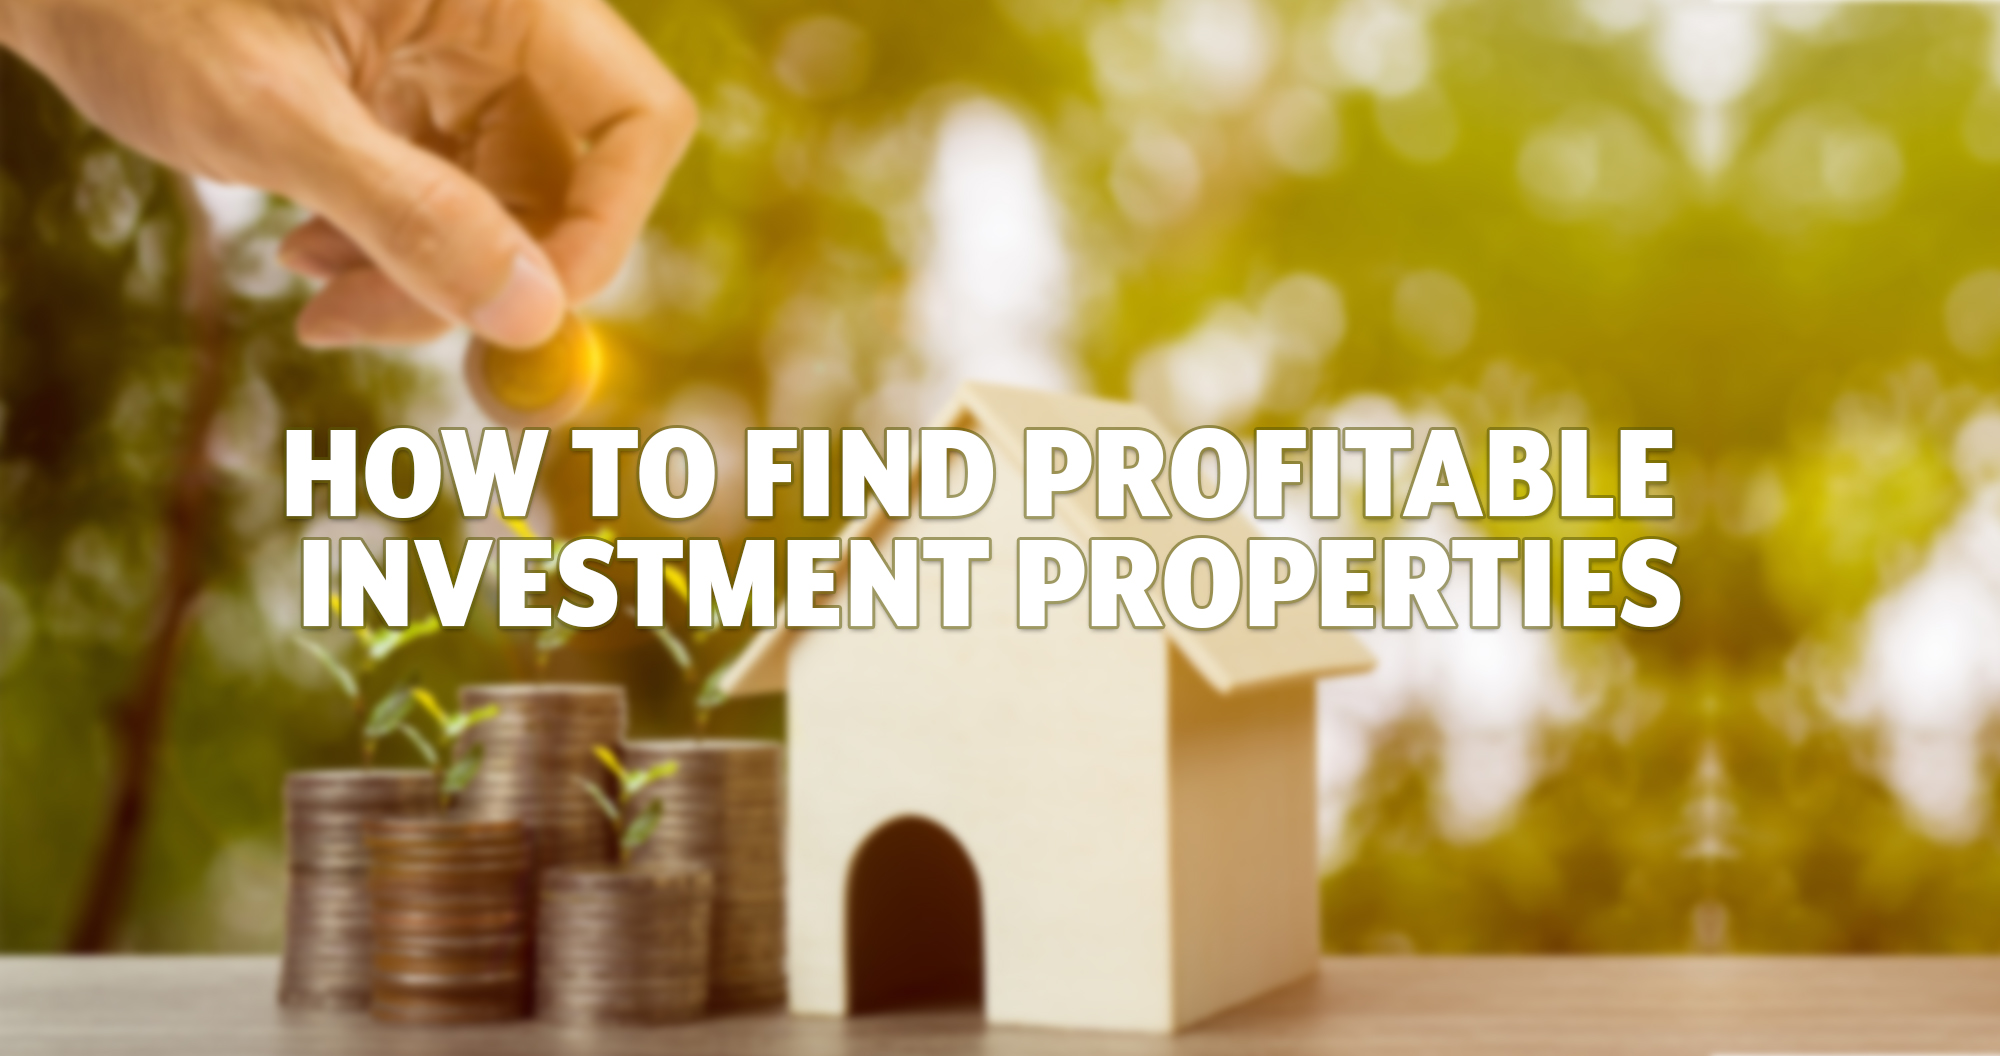 How To Find Profitable Investment Properties